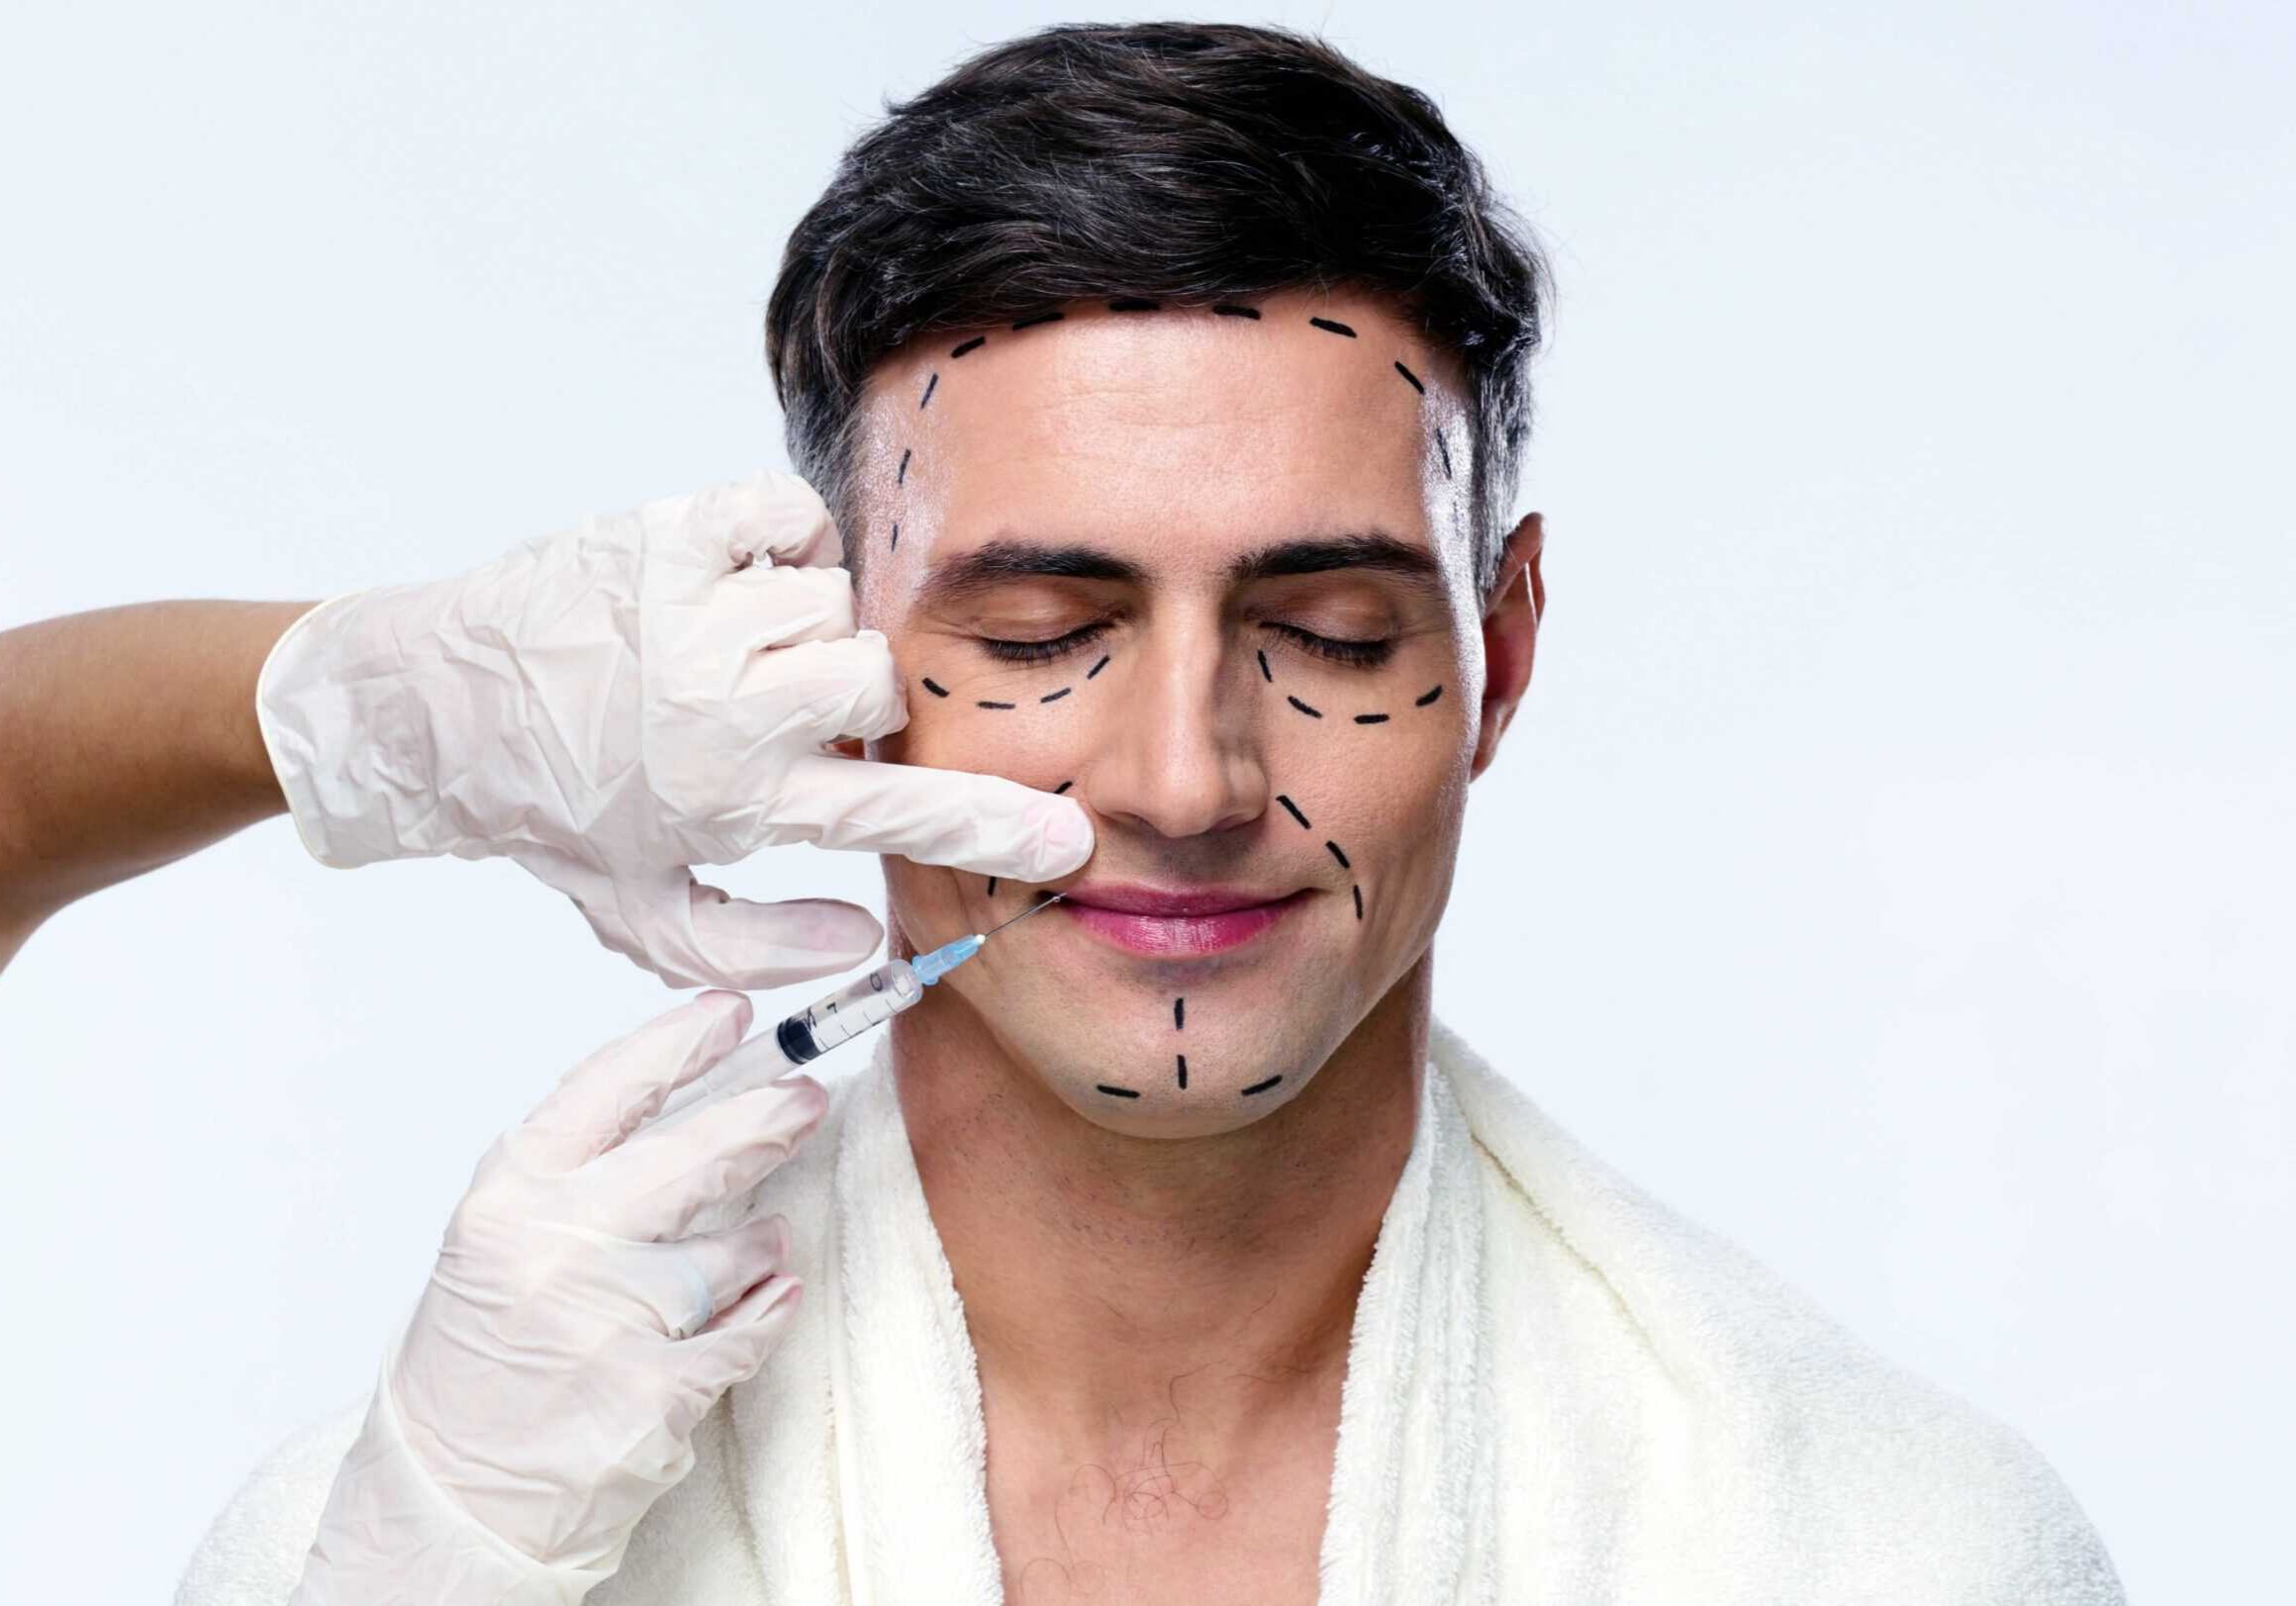 man-undergoing-botox-with-syringe-on-his-face